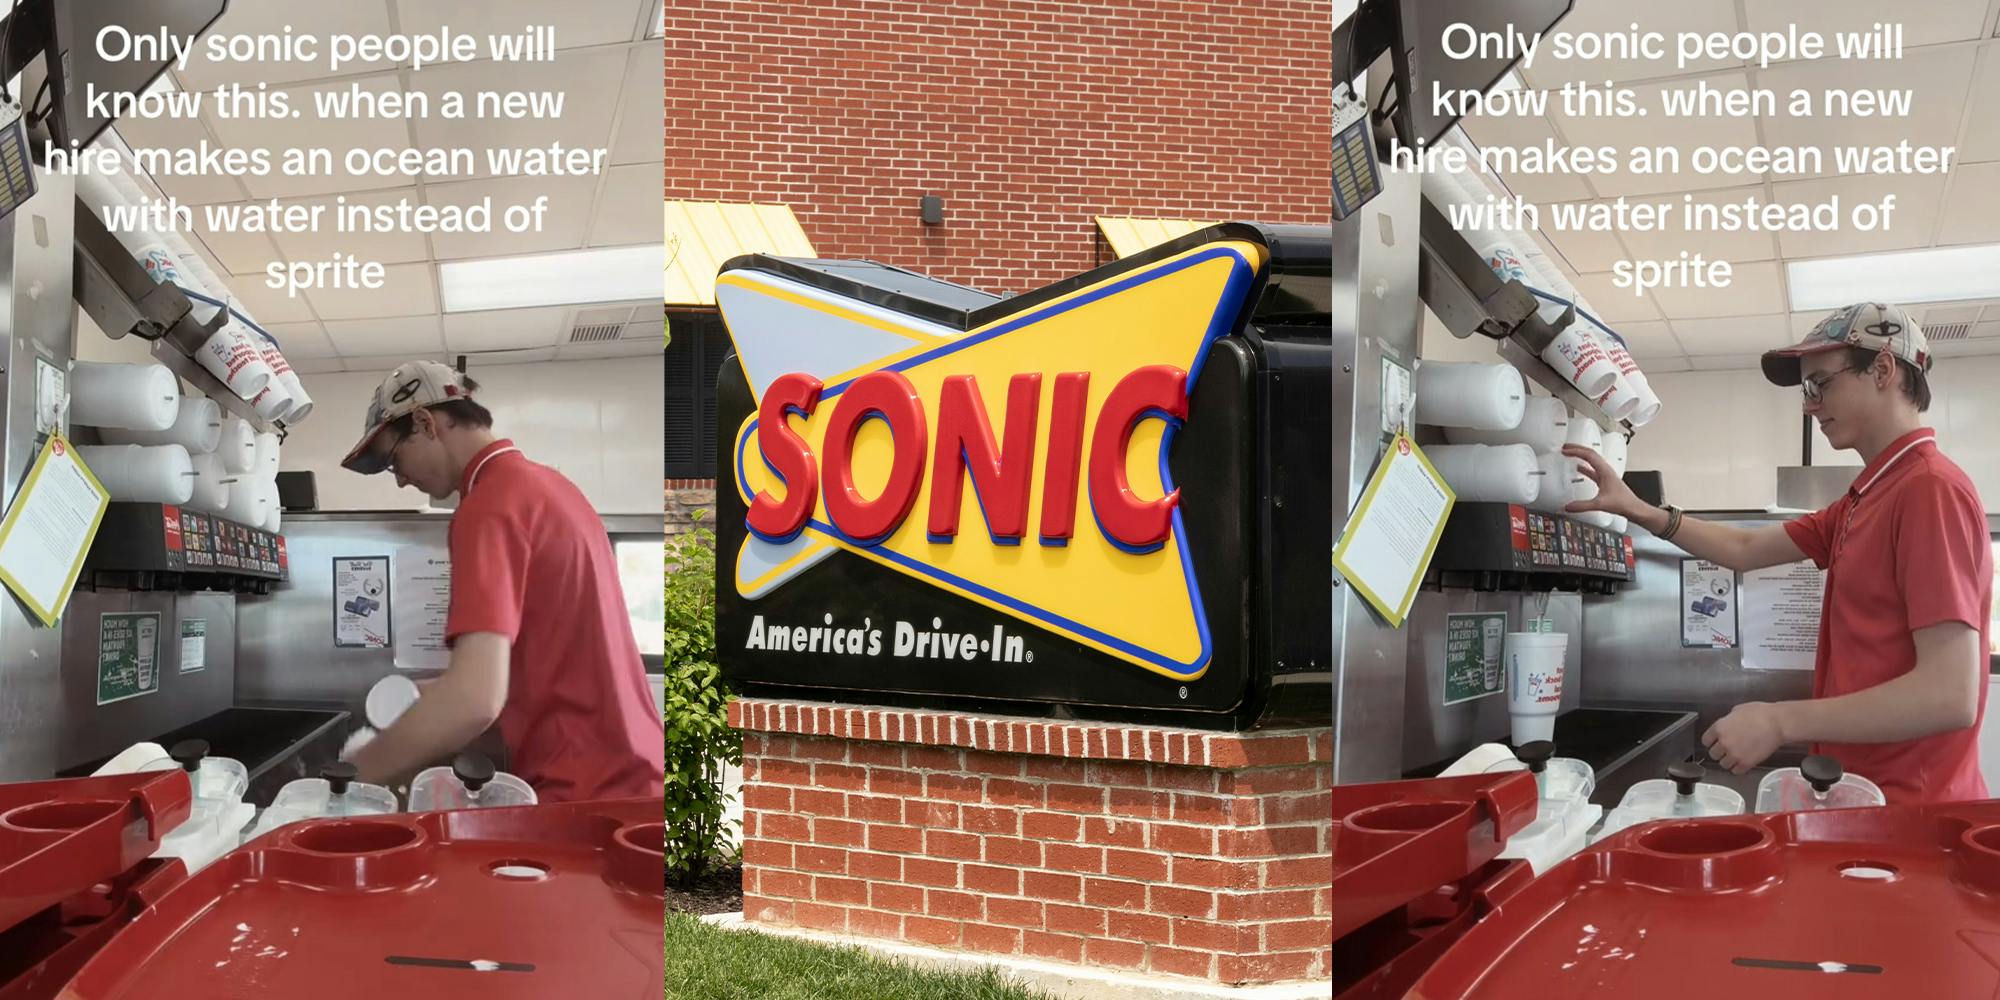 Sonic worker mocks new hires who makes Ocean Water with water instead of Sprite